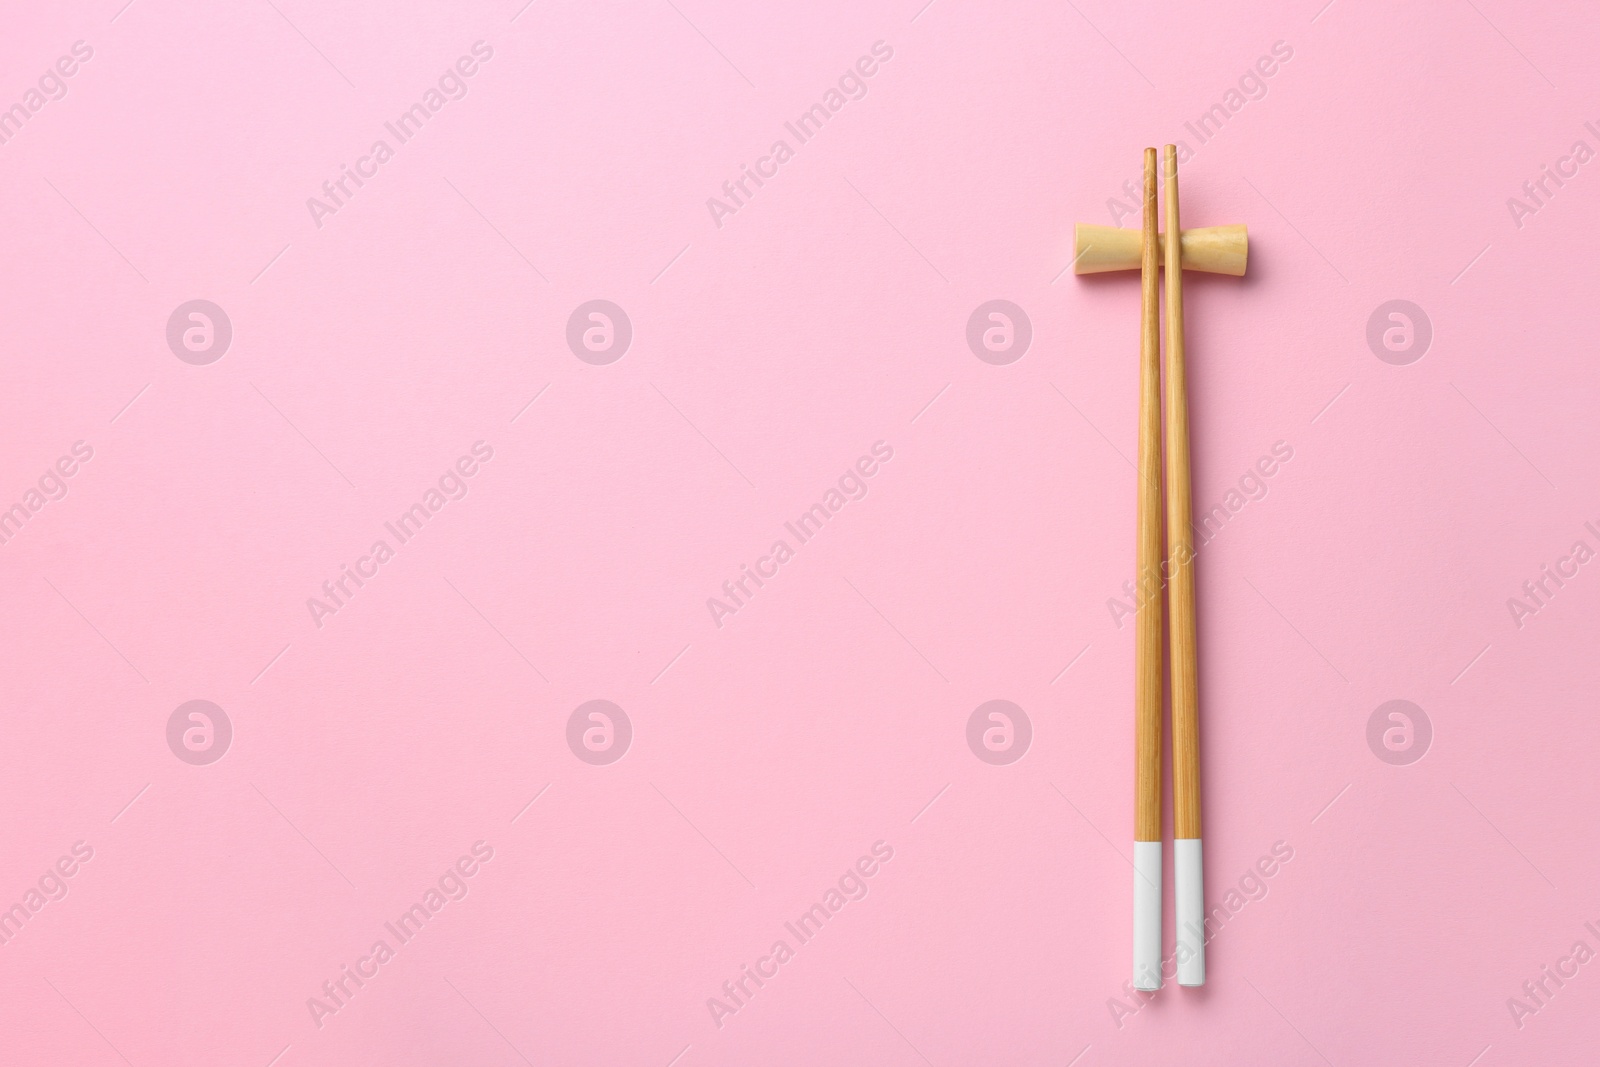 Photo of Pair of wooden chopsticks with rest on pink background, top view. Space for text